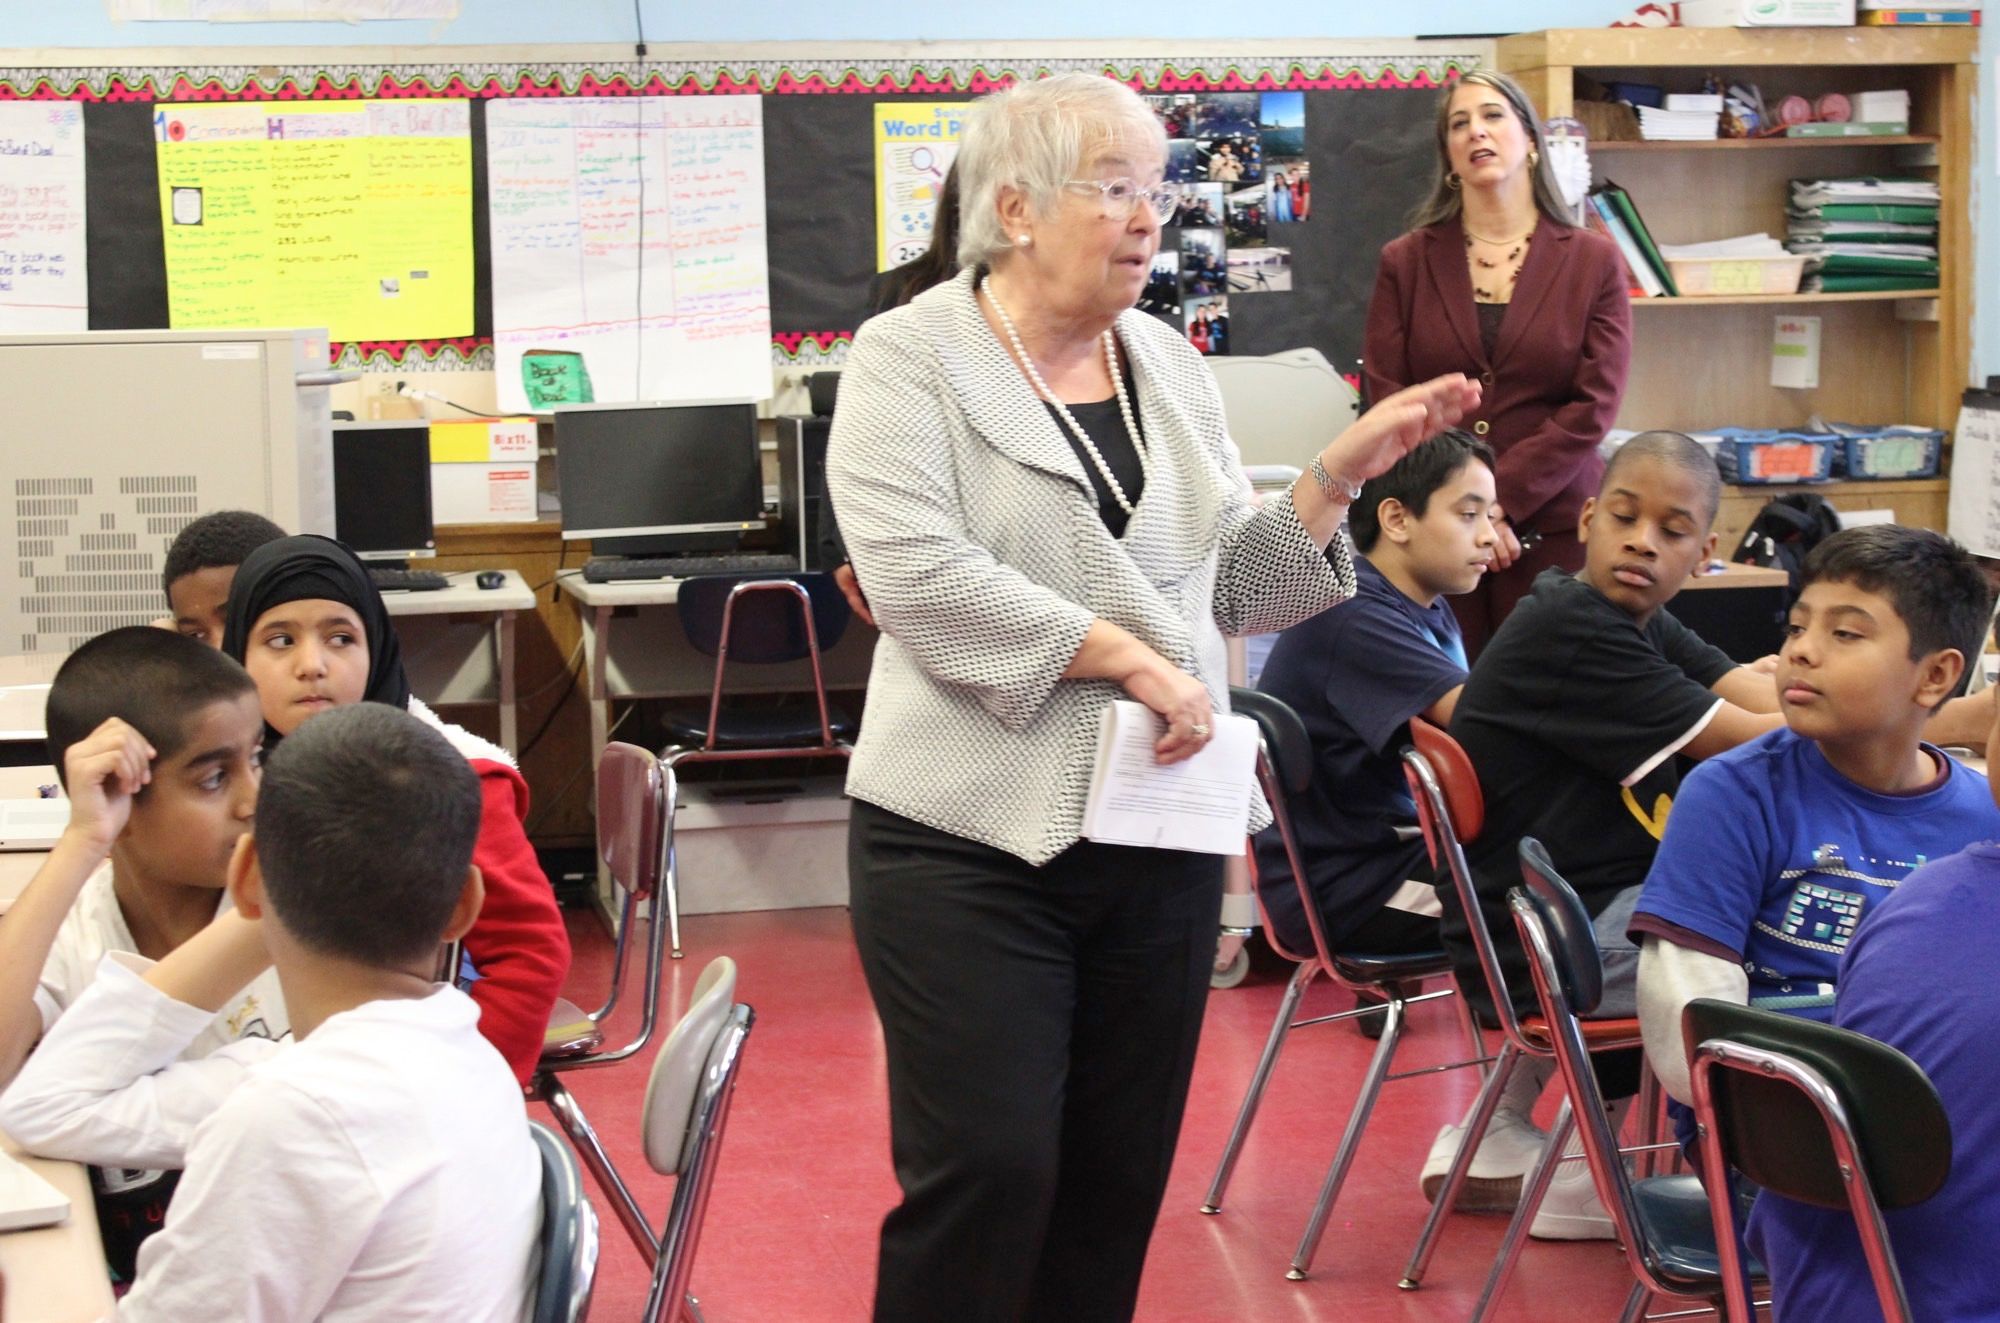 Chancellor Fariña Celebrates The Hour Of Code At Ditmas IS 62